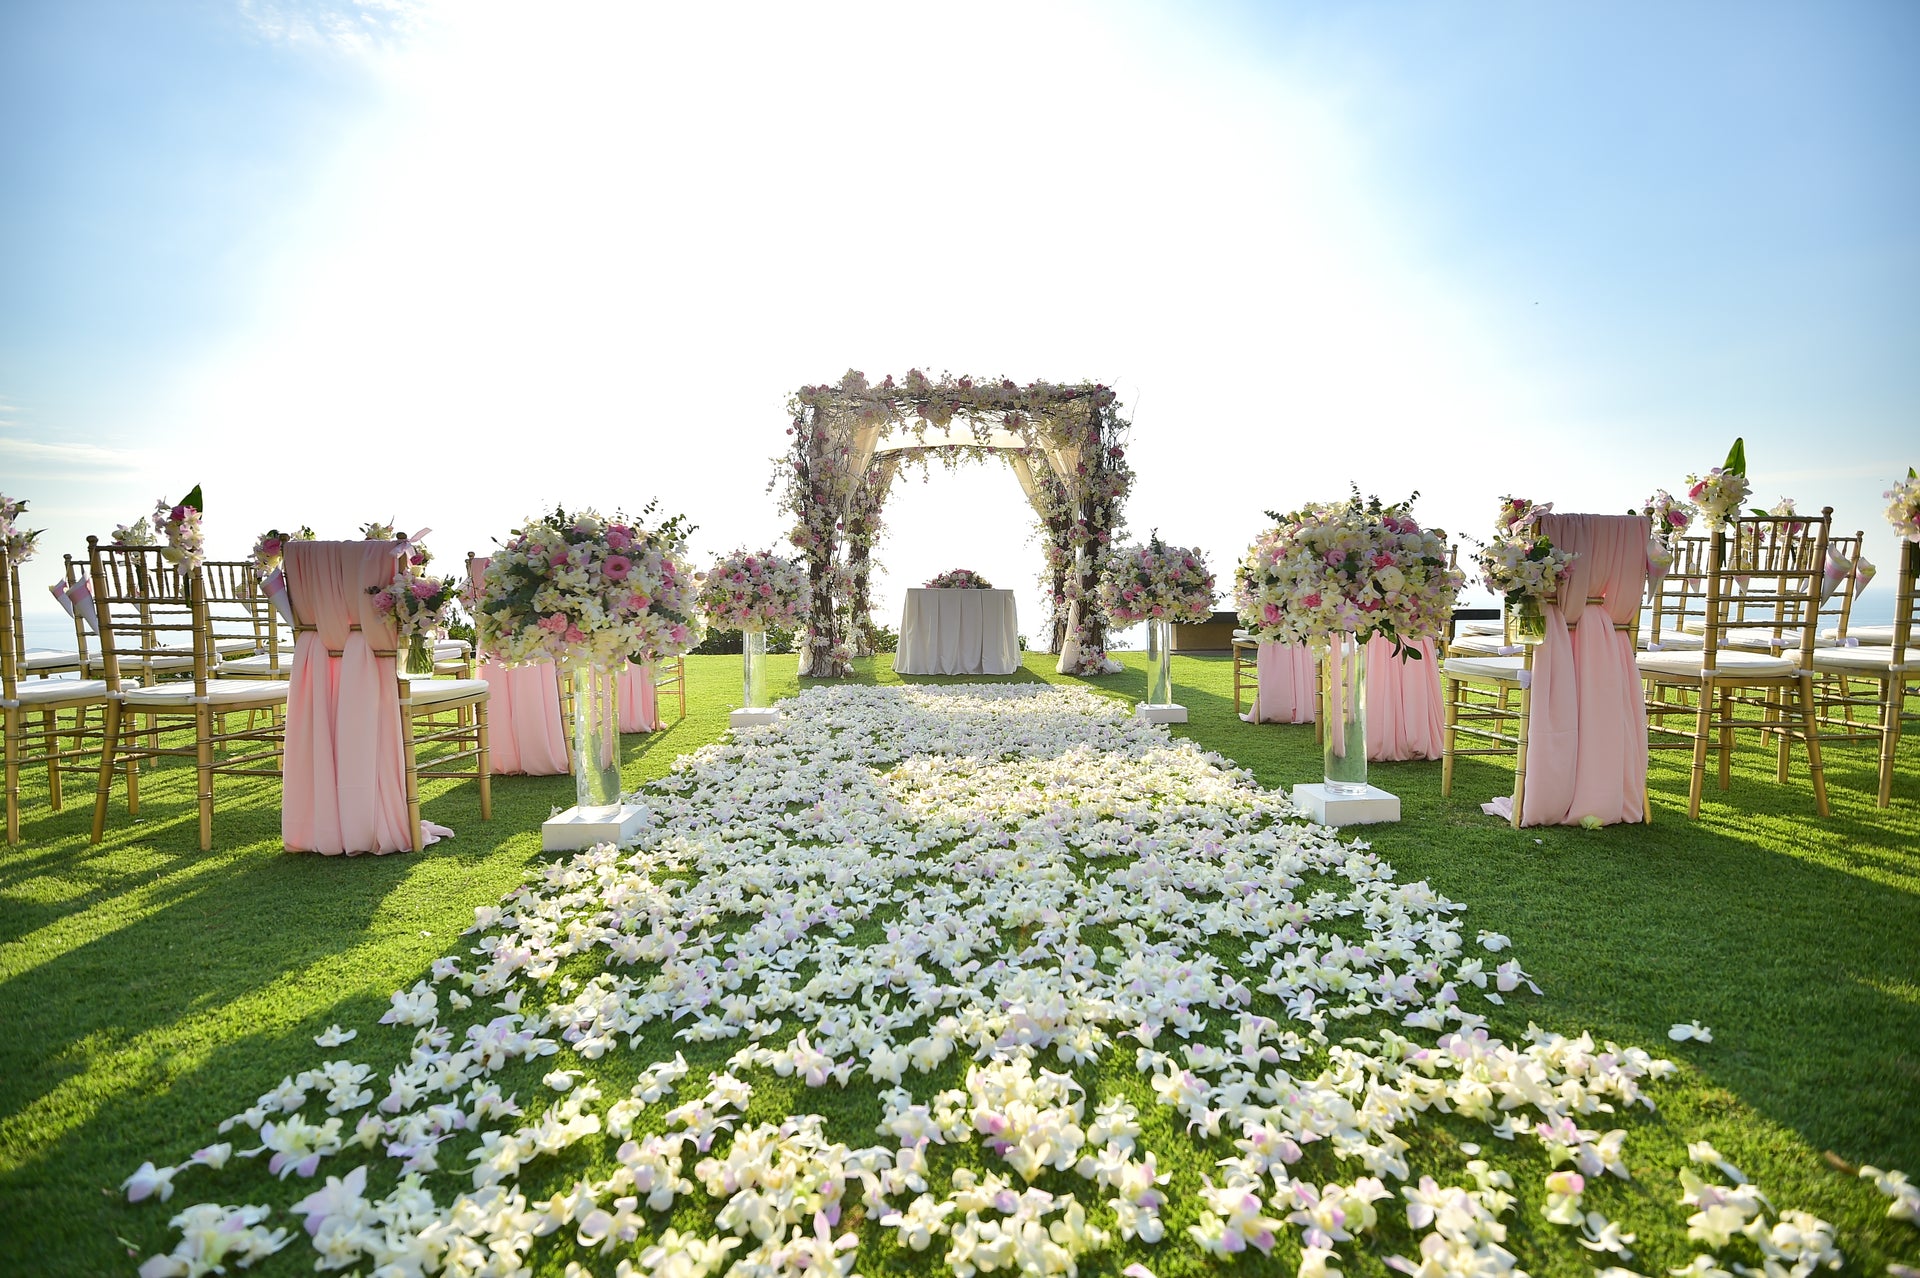 Bridal Blooms: Incorporating Spring Flowers into Your Outdoor Wedding